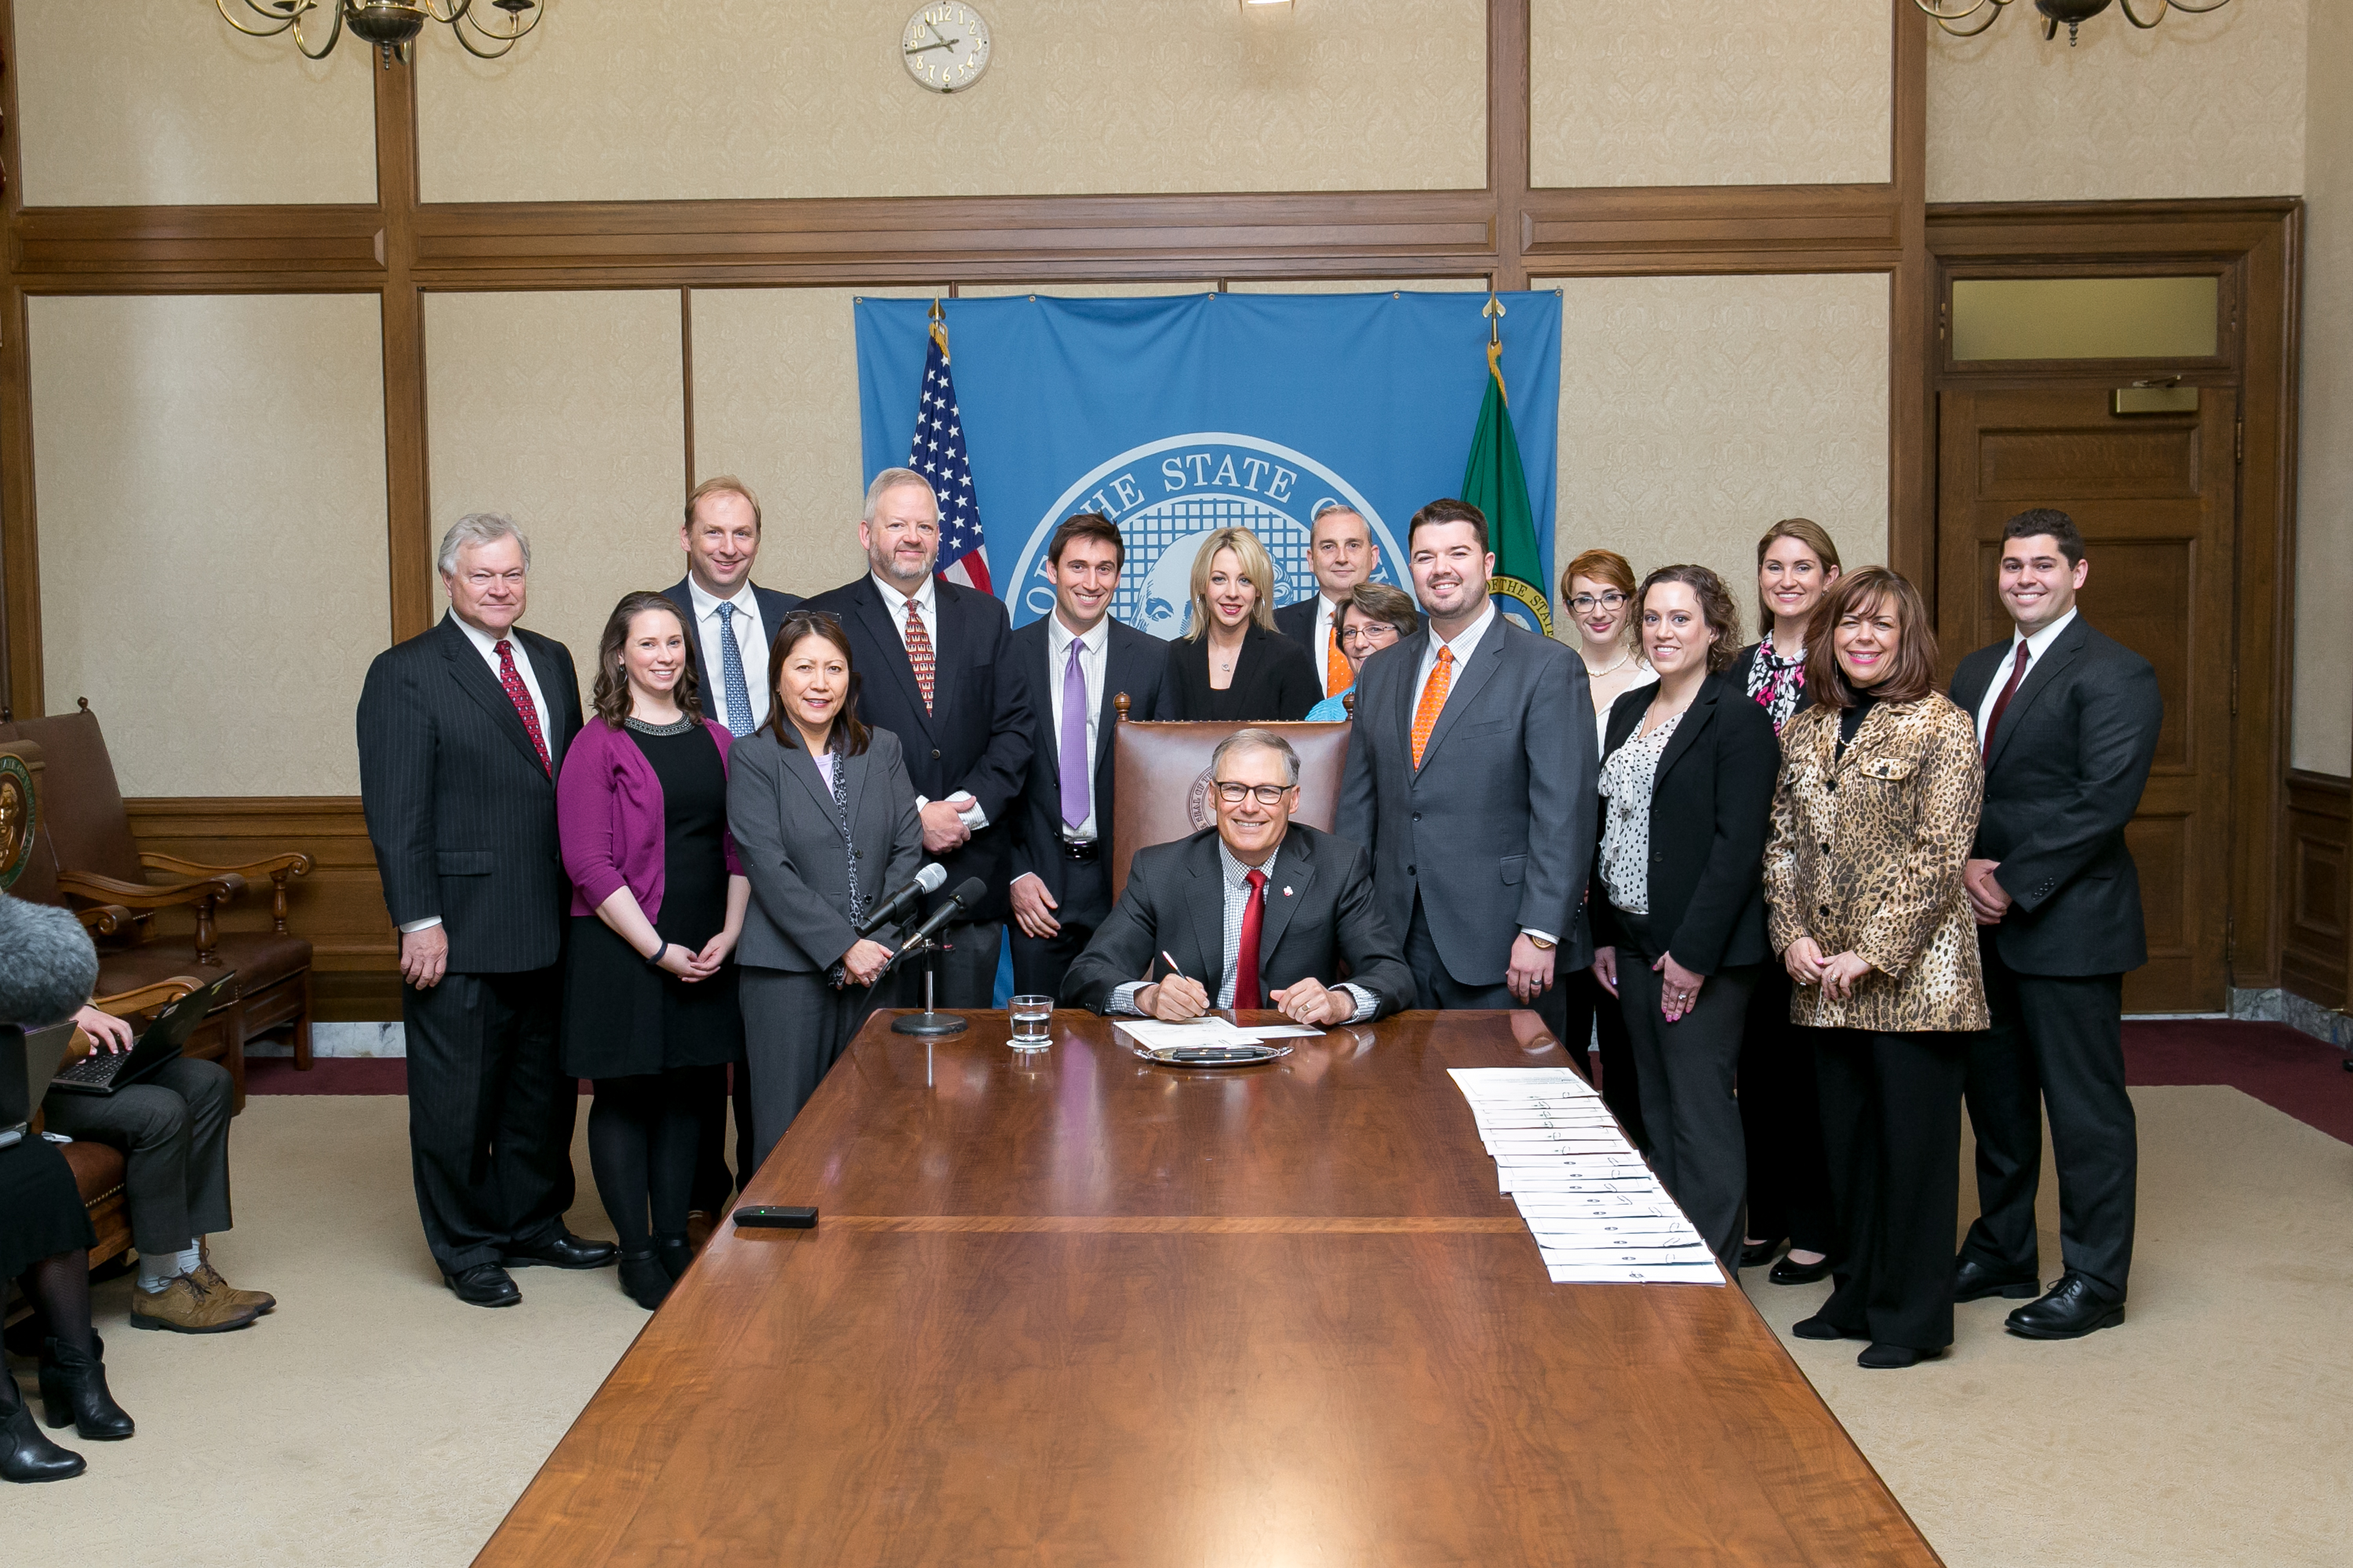 The Carney start-up team joins the bill signing for HB 1593 (small securities offerings)